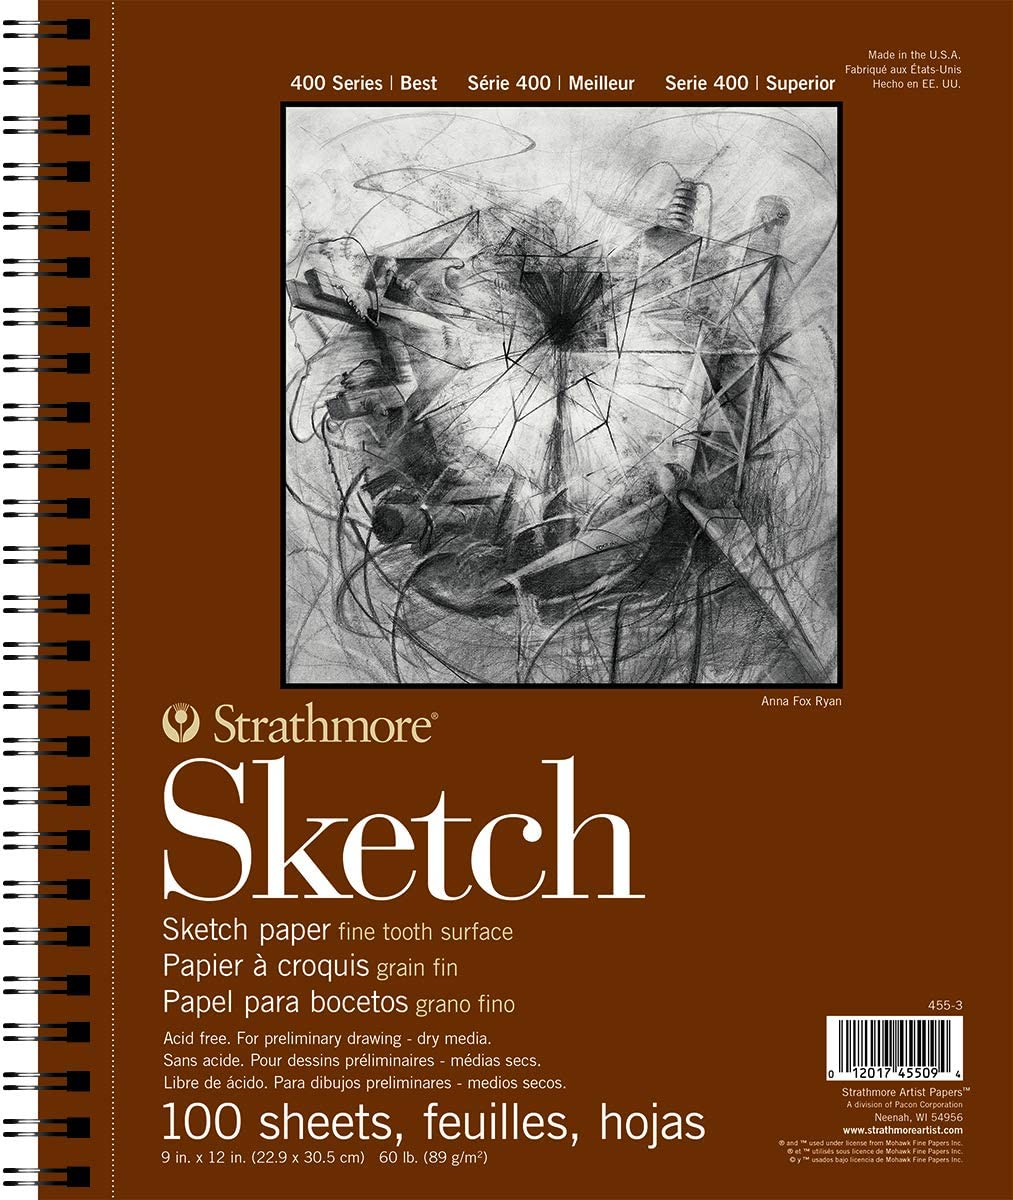 https://www.dontwasteyourmoney.com/wp-content/uploads/2021/11/strathmore-400-series-fine-tooth-surface-9-x-12-inch-drawing-pad-drawing-pad.jpg